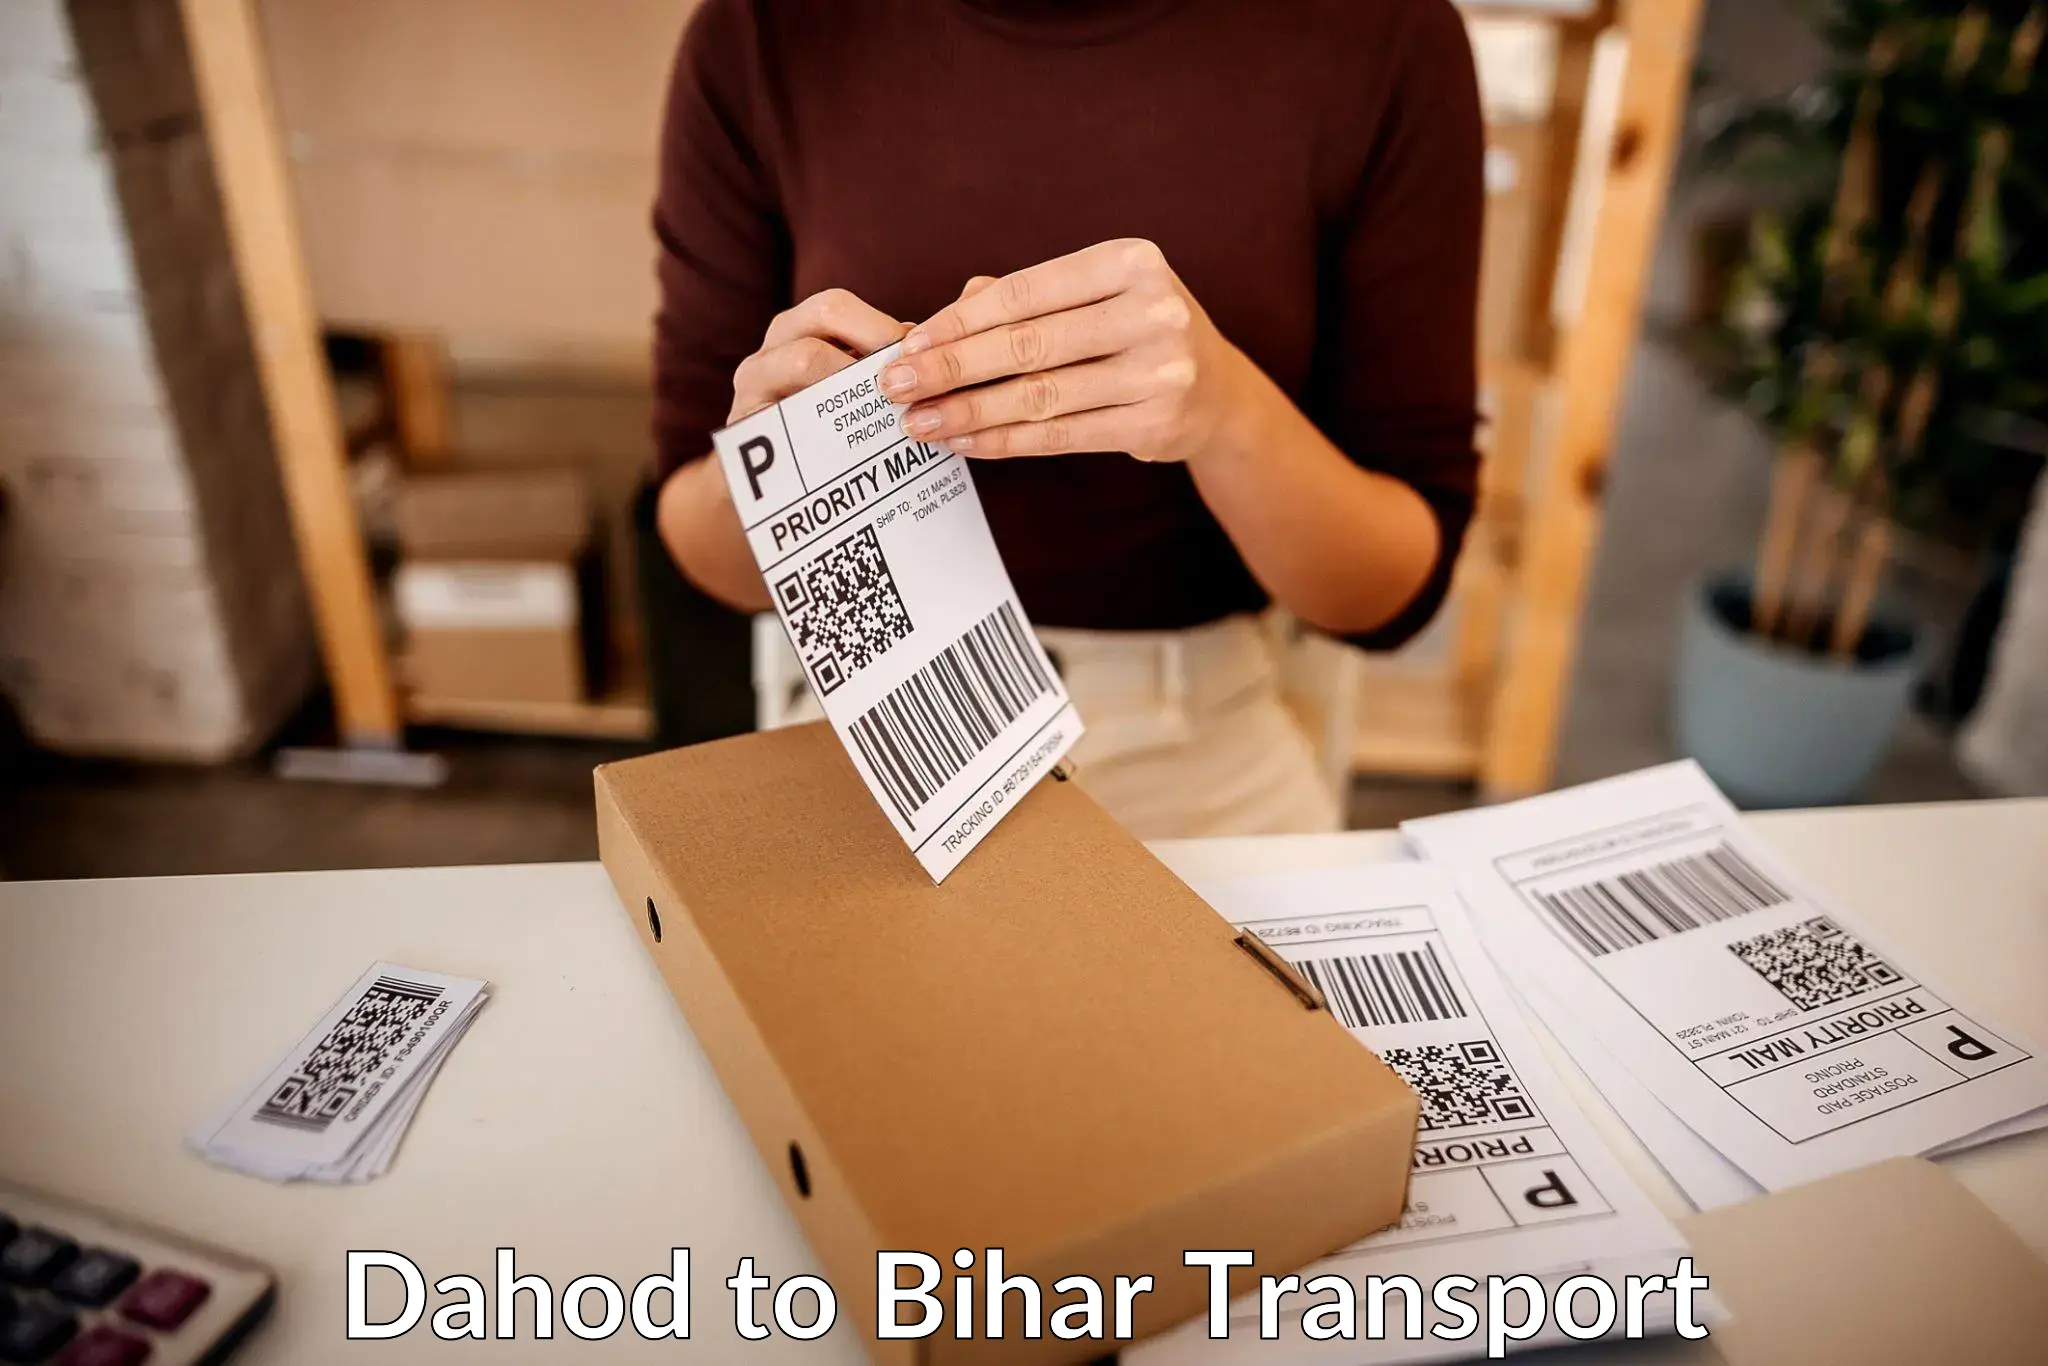 Commercial transport service Dahod to Punsia